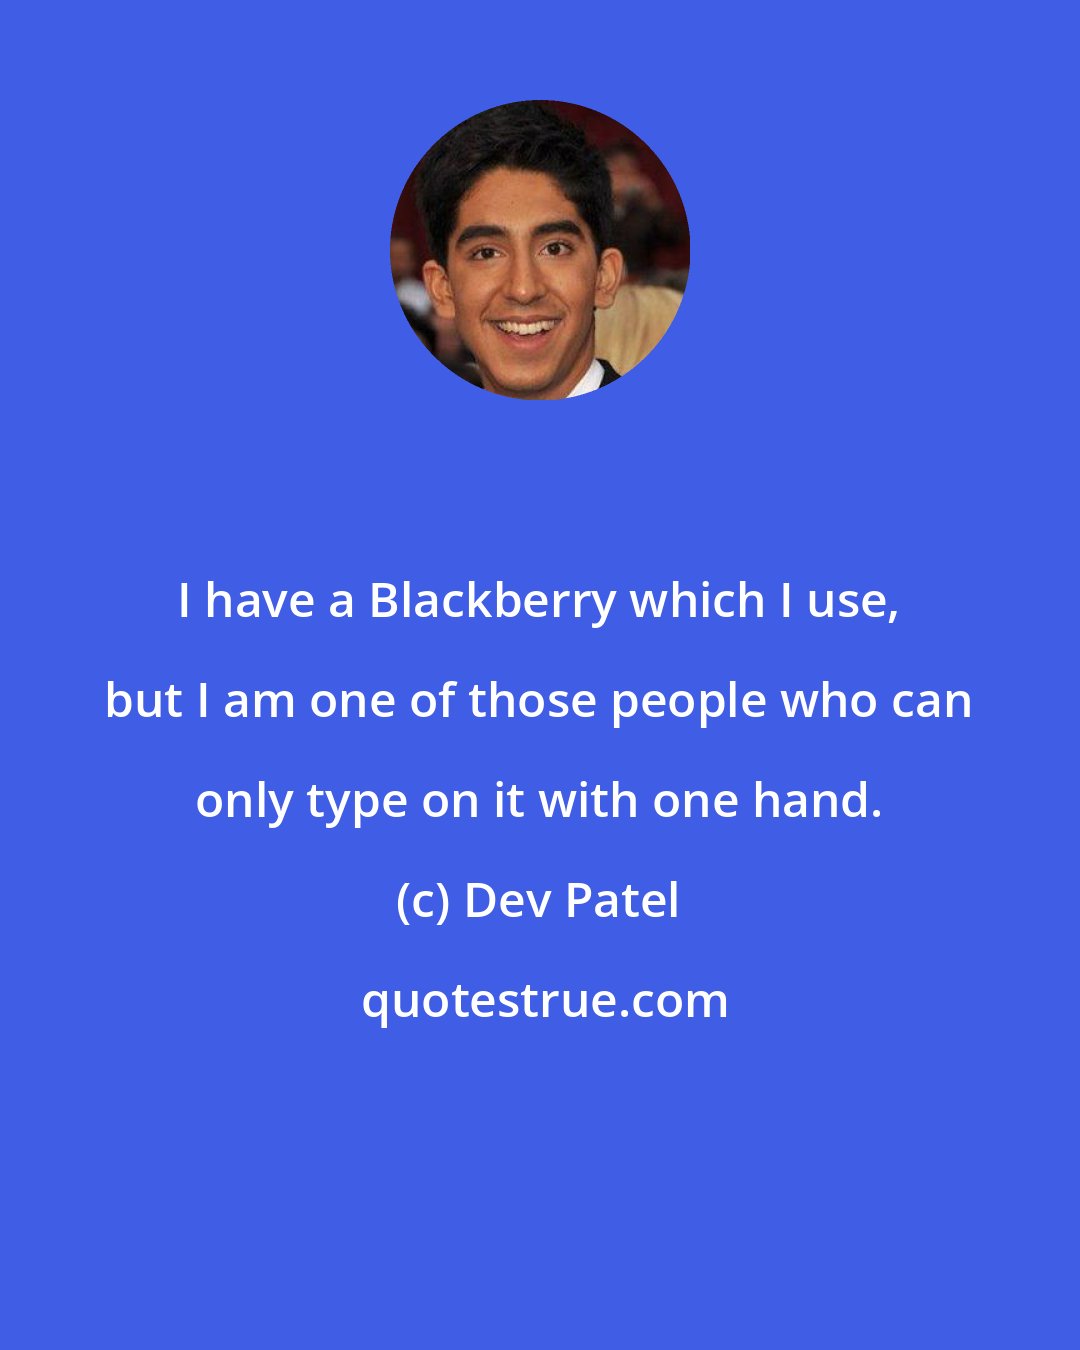 Dev Patel: I have a Blackberry which I use, but I am one of those people who can only type on it with one hand.